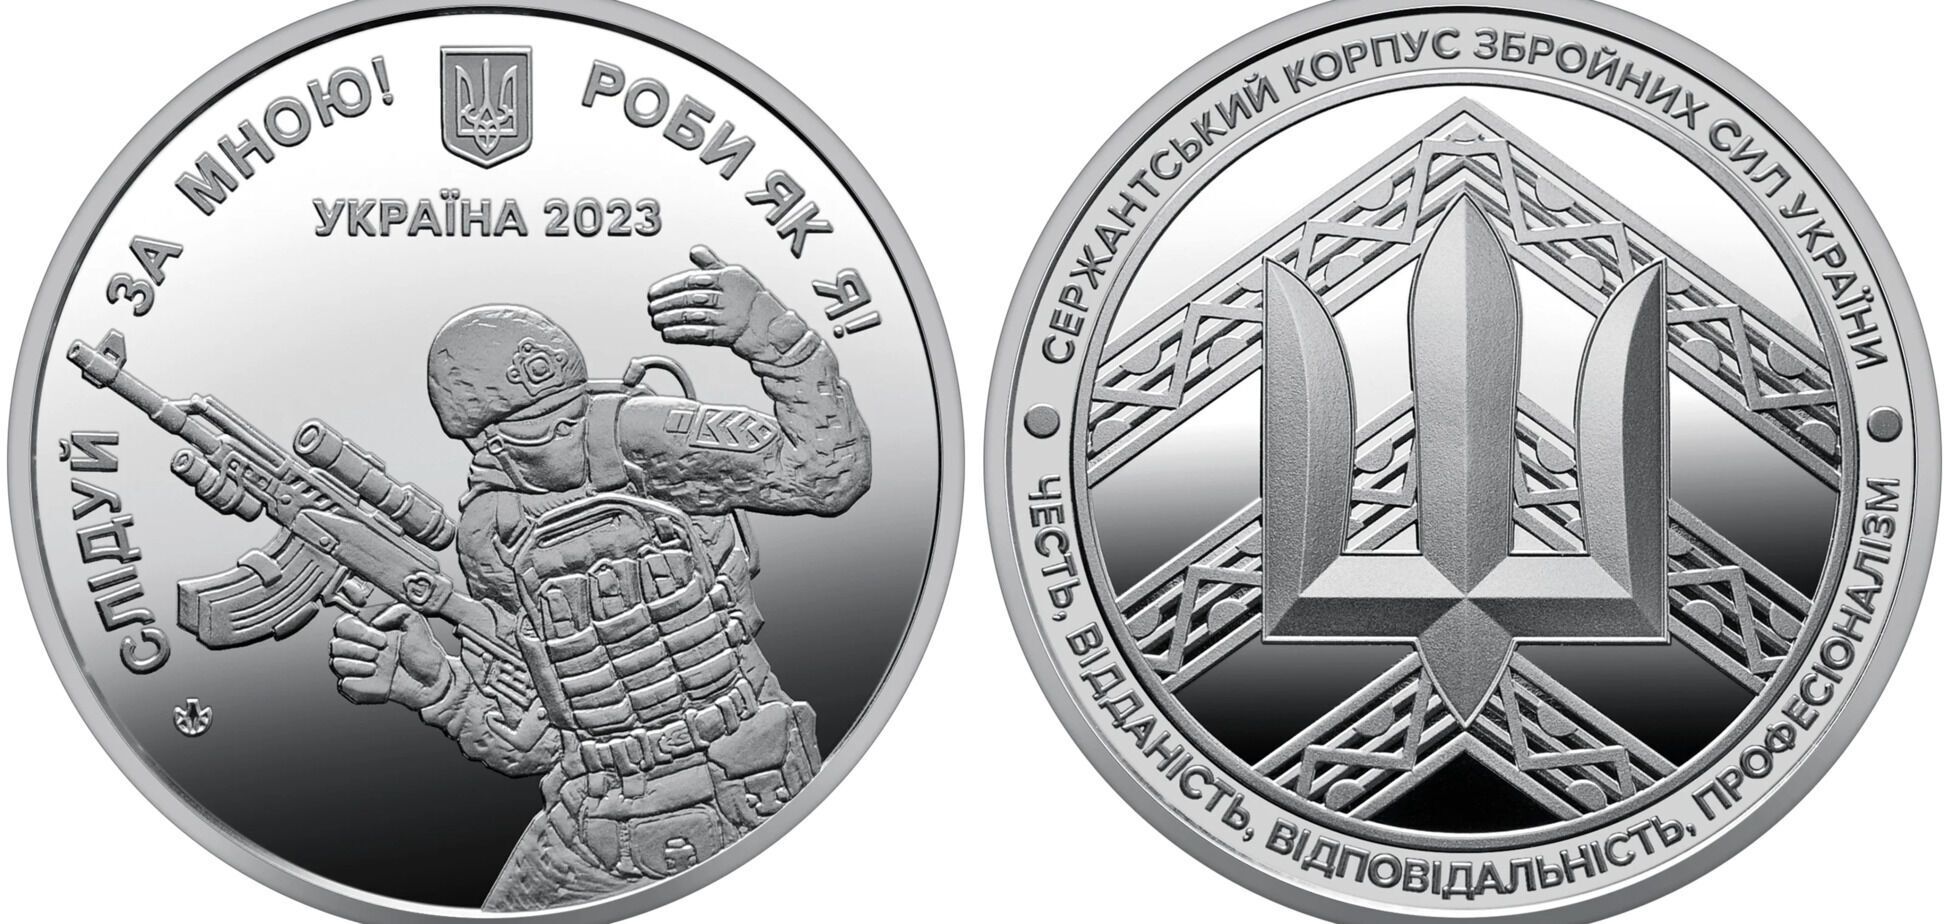 Obverse and reverse of the Sergeant Corps medal